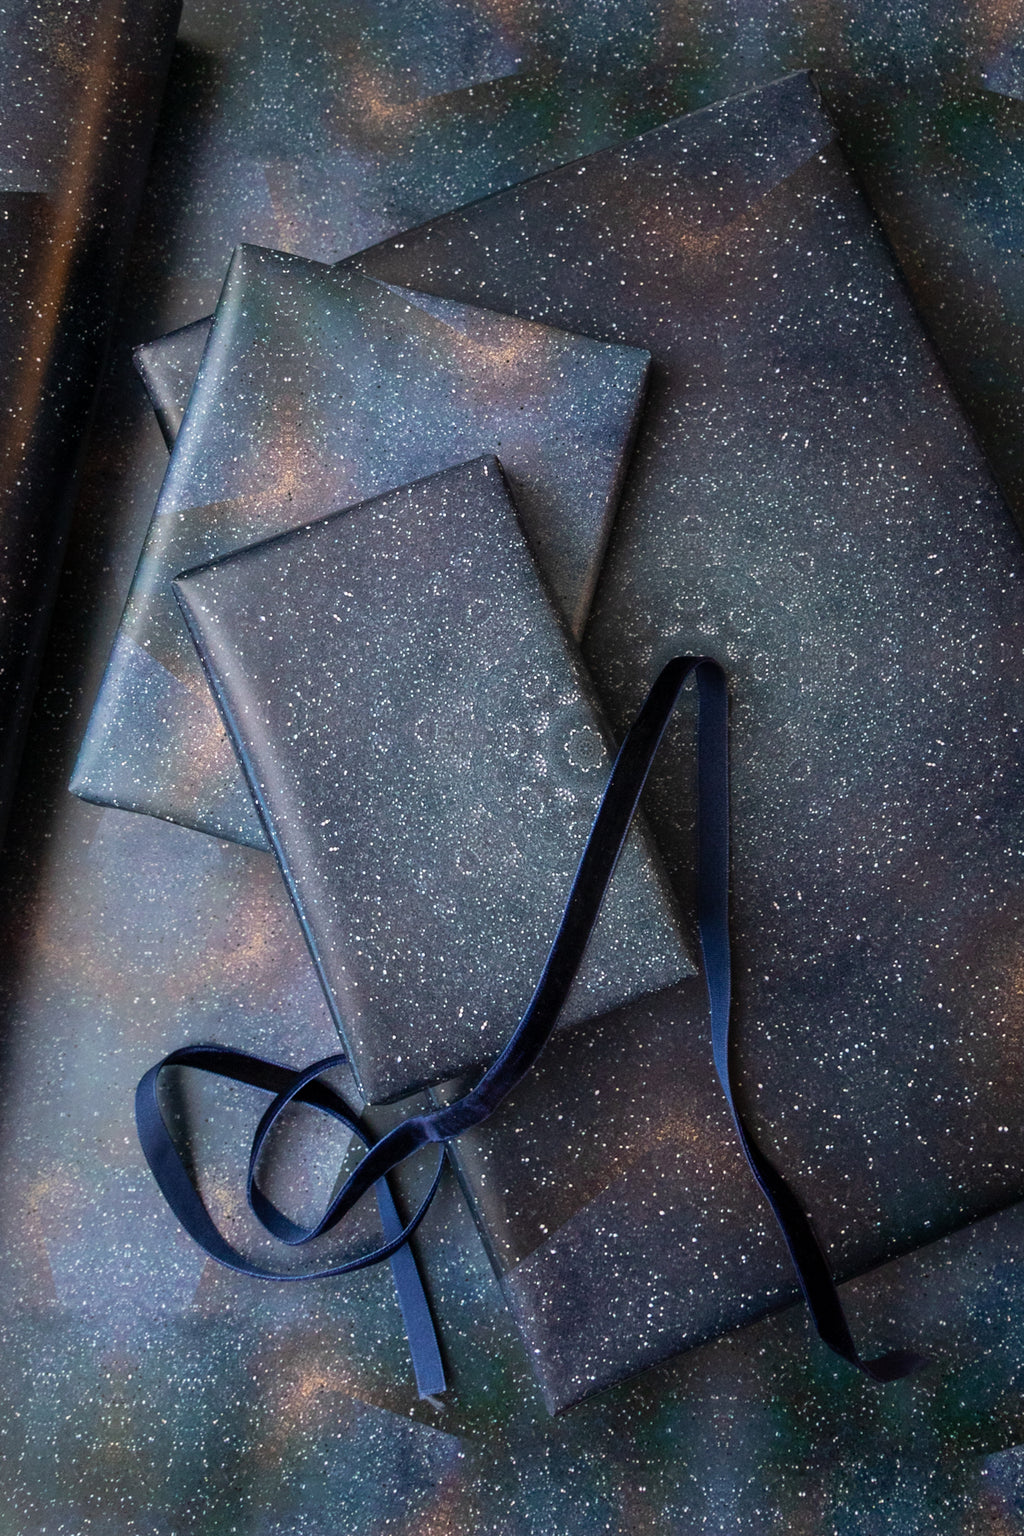 Galaxy Wrapping Paper